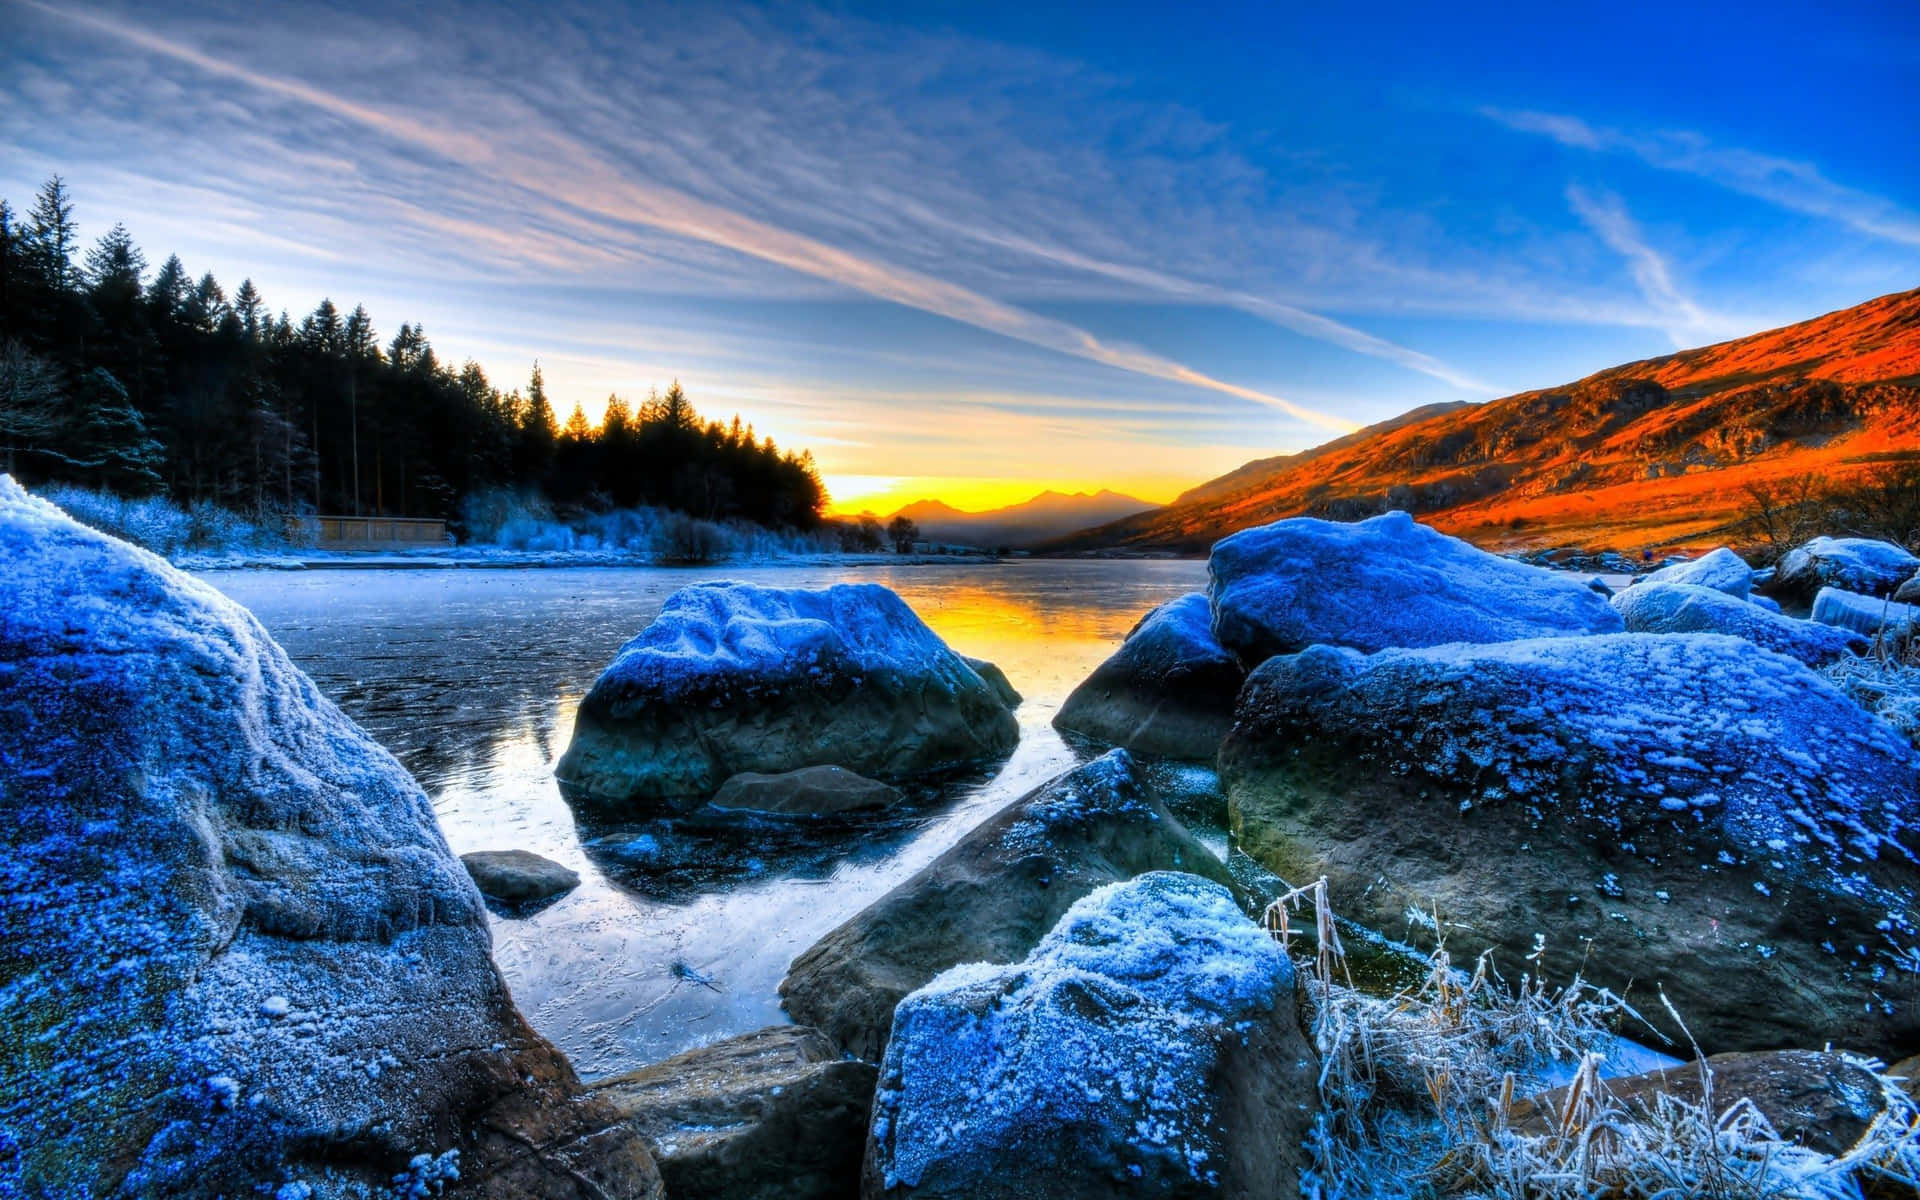 Enchanting mountain landscape with a serene lake at sunset Wallpaper